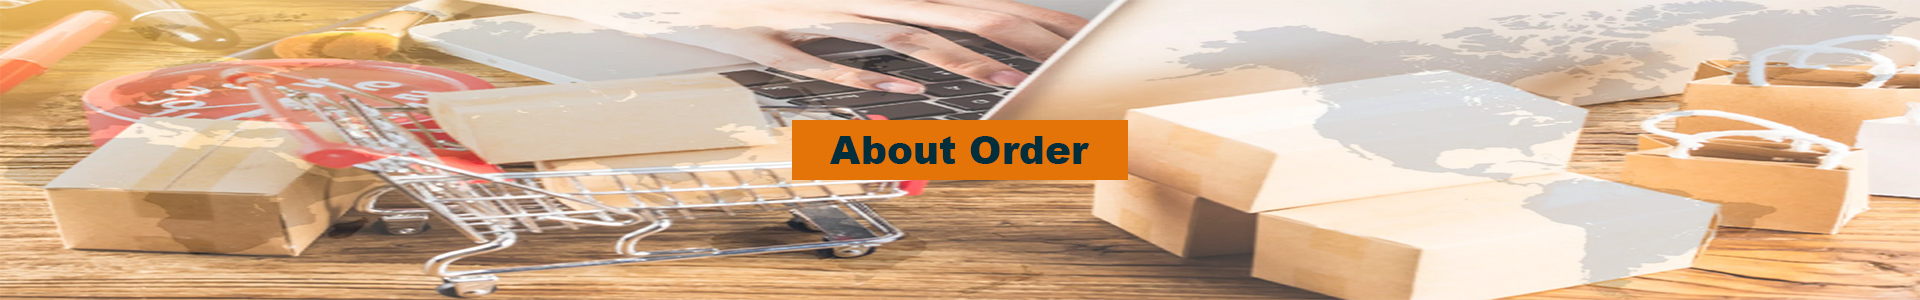 about_order